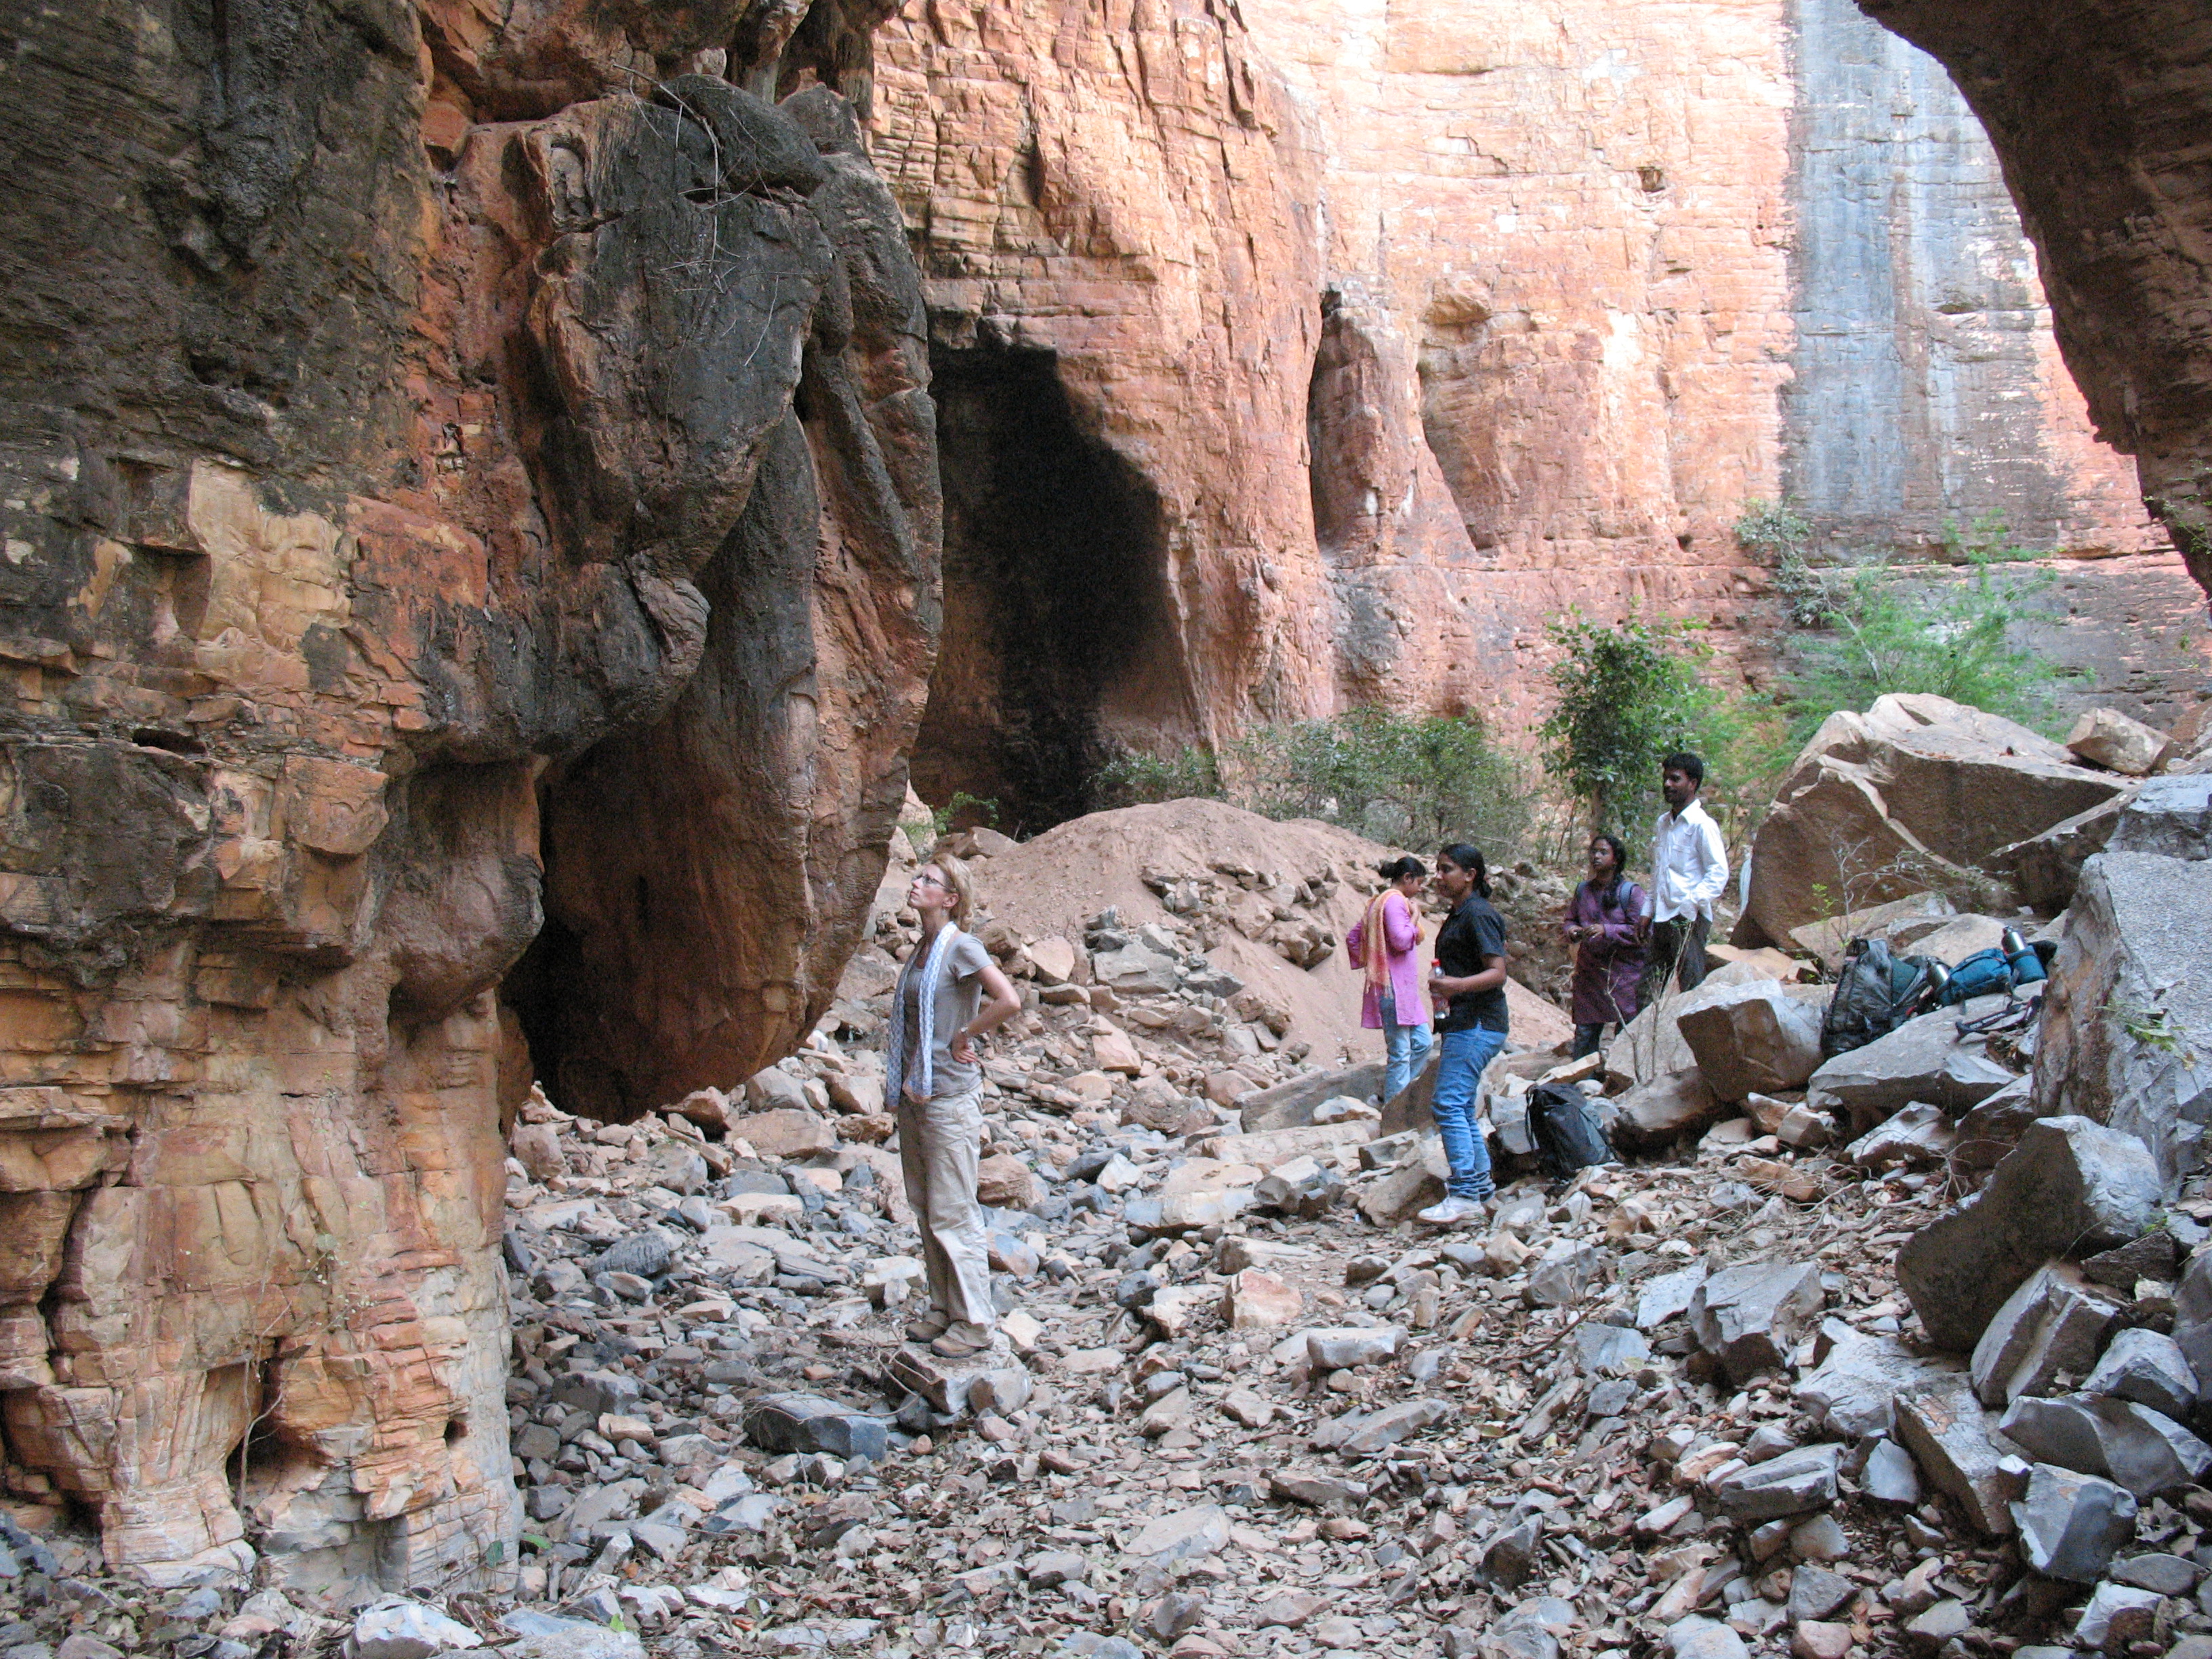 Billasurgam Cave where India's earliest rock art has been dated to 5000 years.